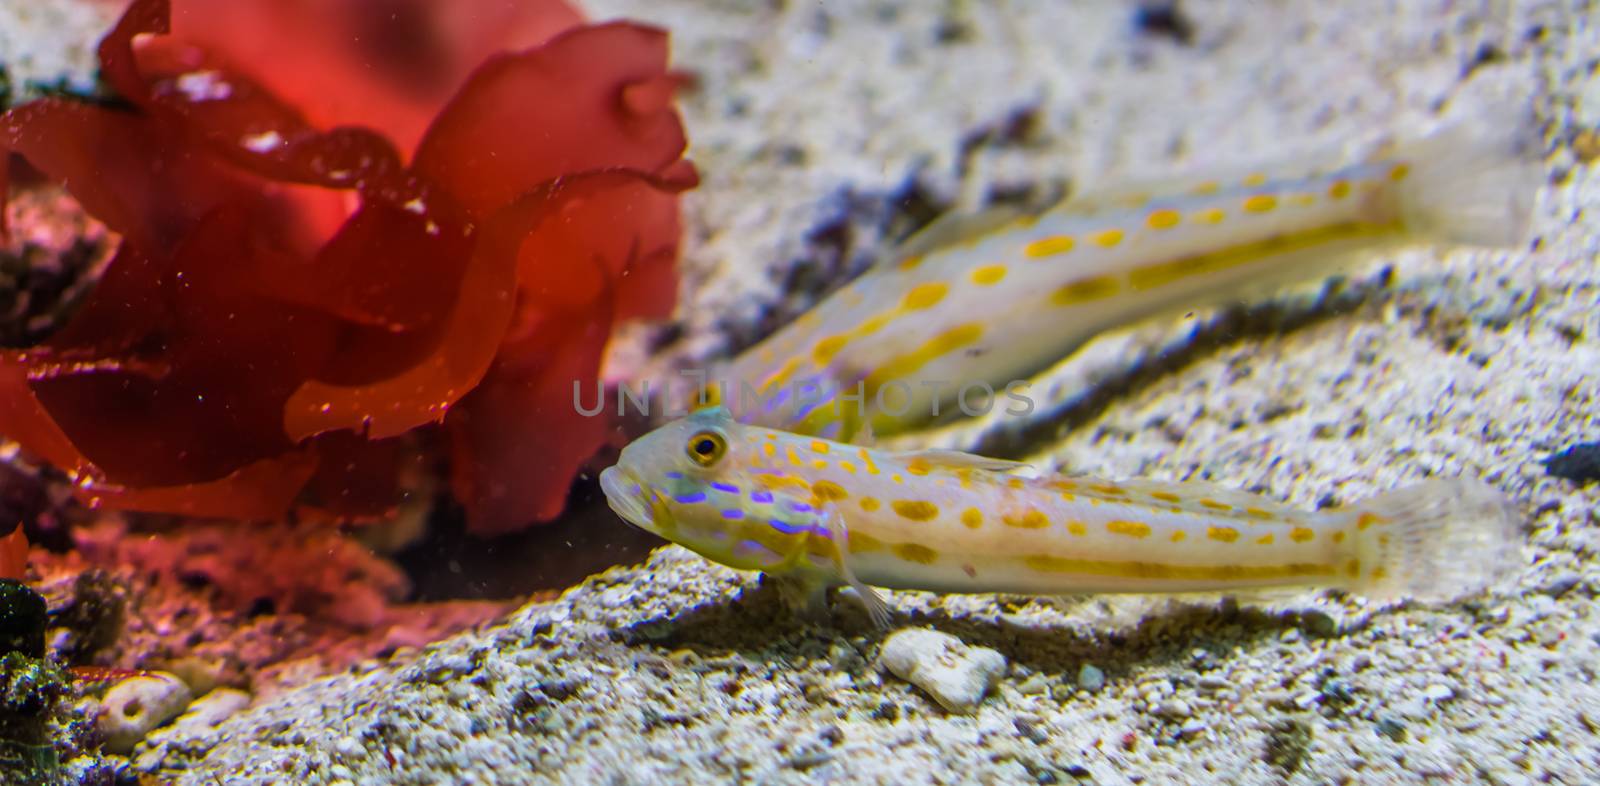 orange spotted sleeper goby in closeup, Sand sifting fish, tropical aquarium pet from the indian ocean